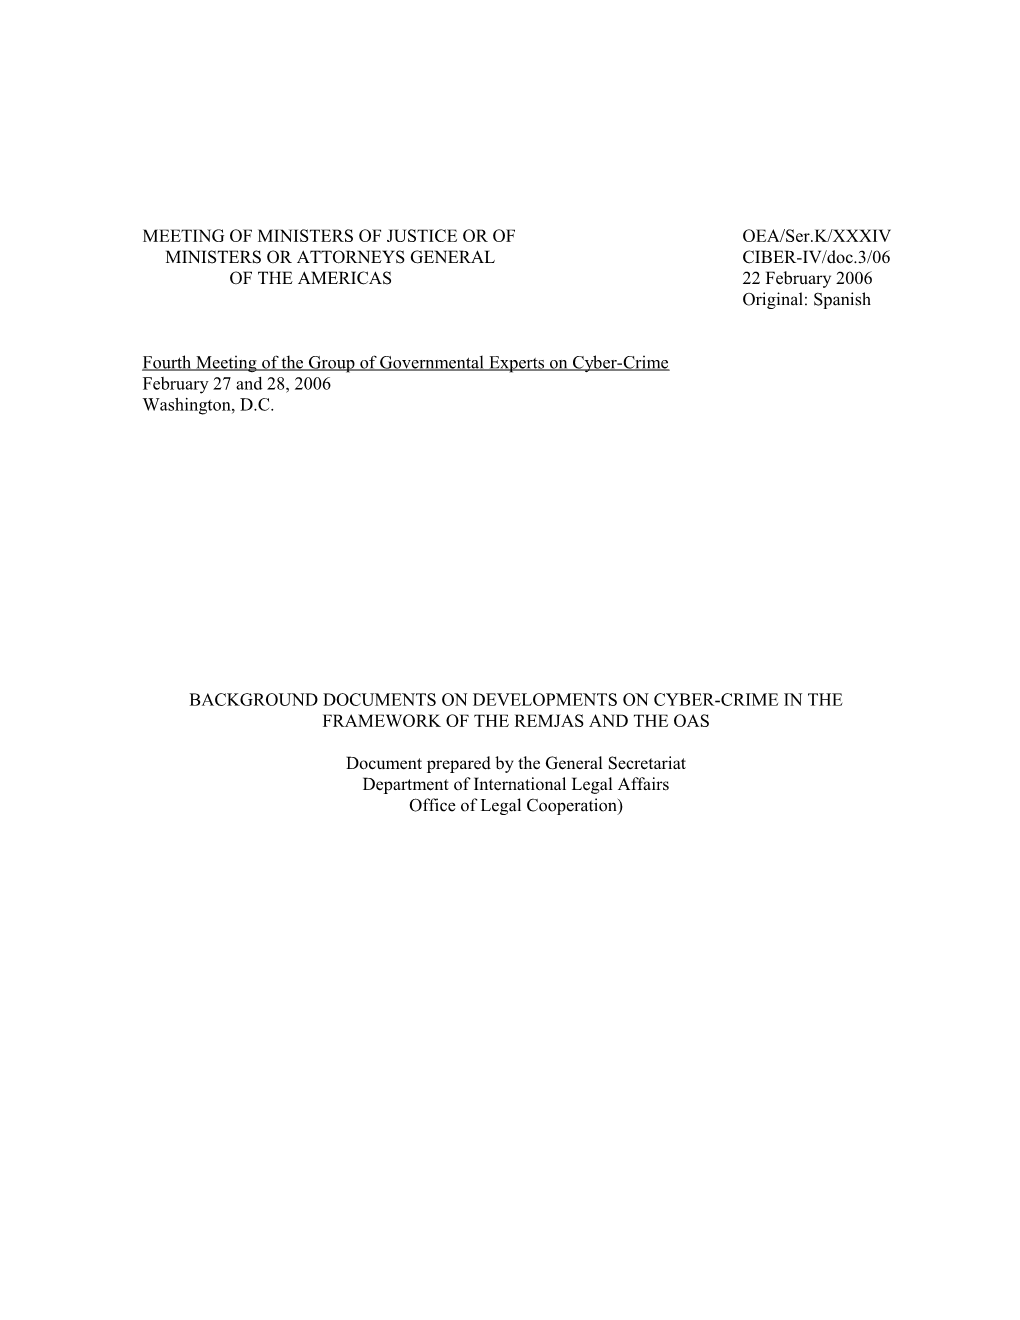 Background Documents on Developments on Cybercrime in the Framework of the Remjas and the Oas